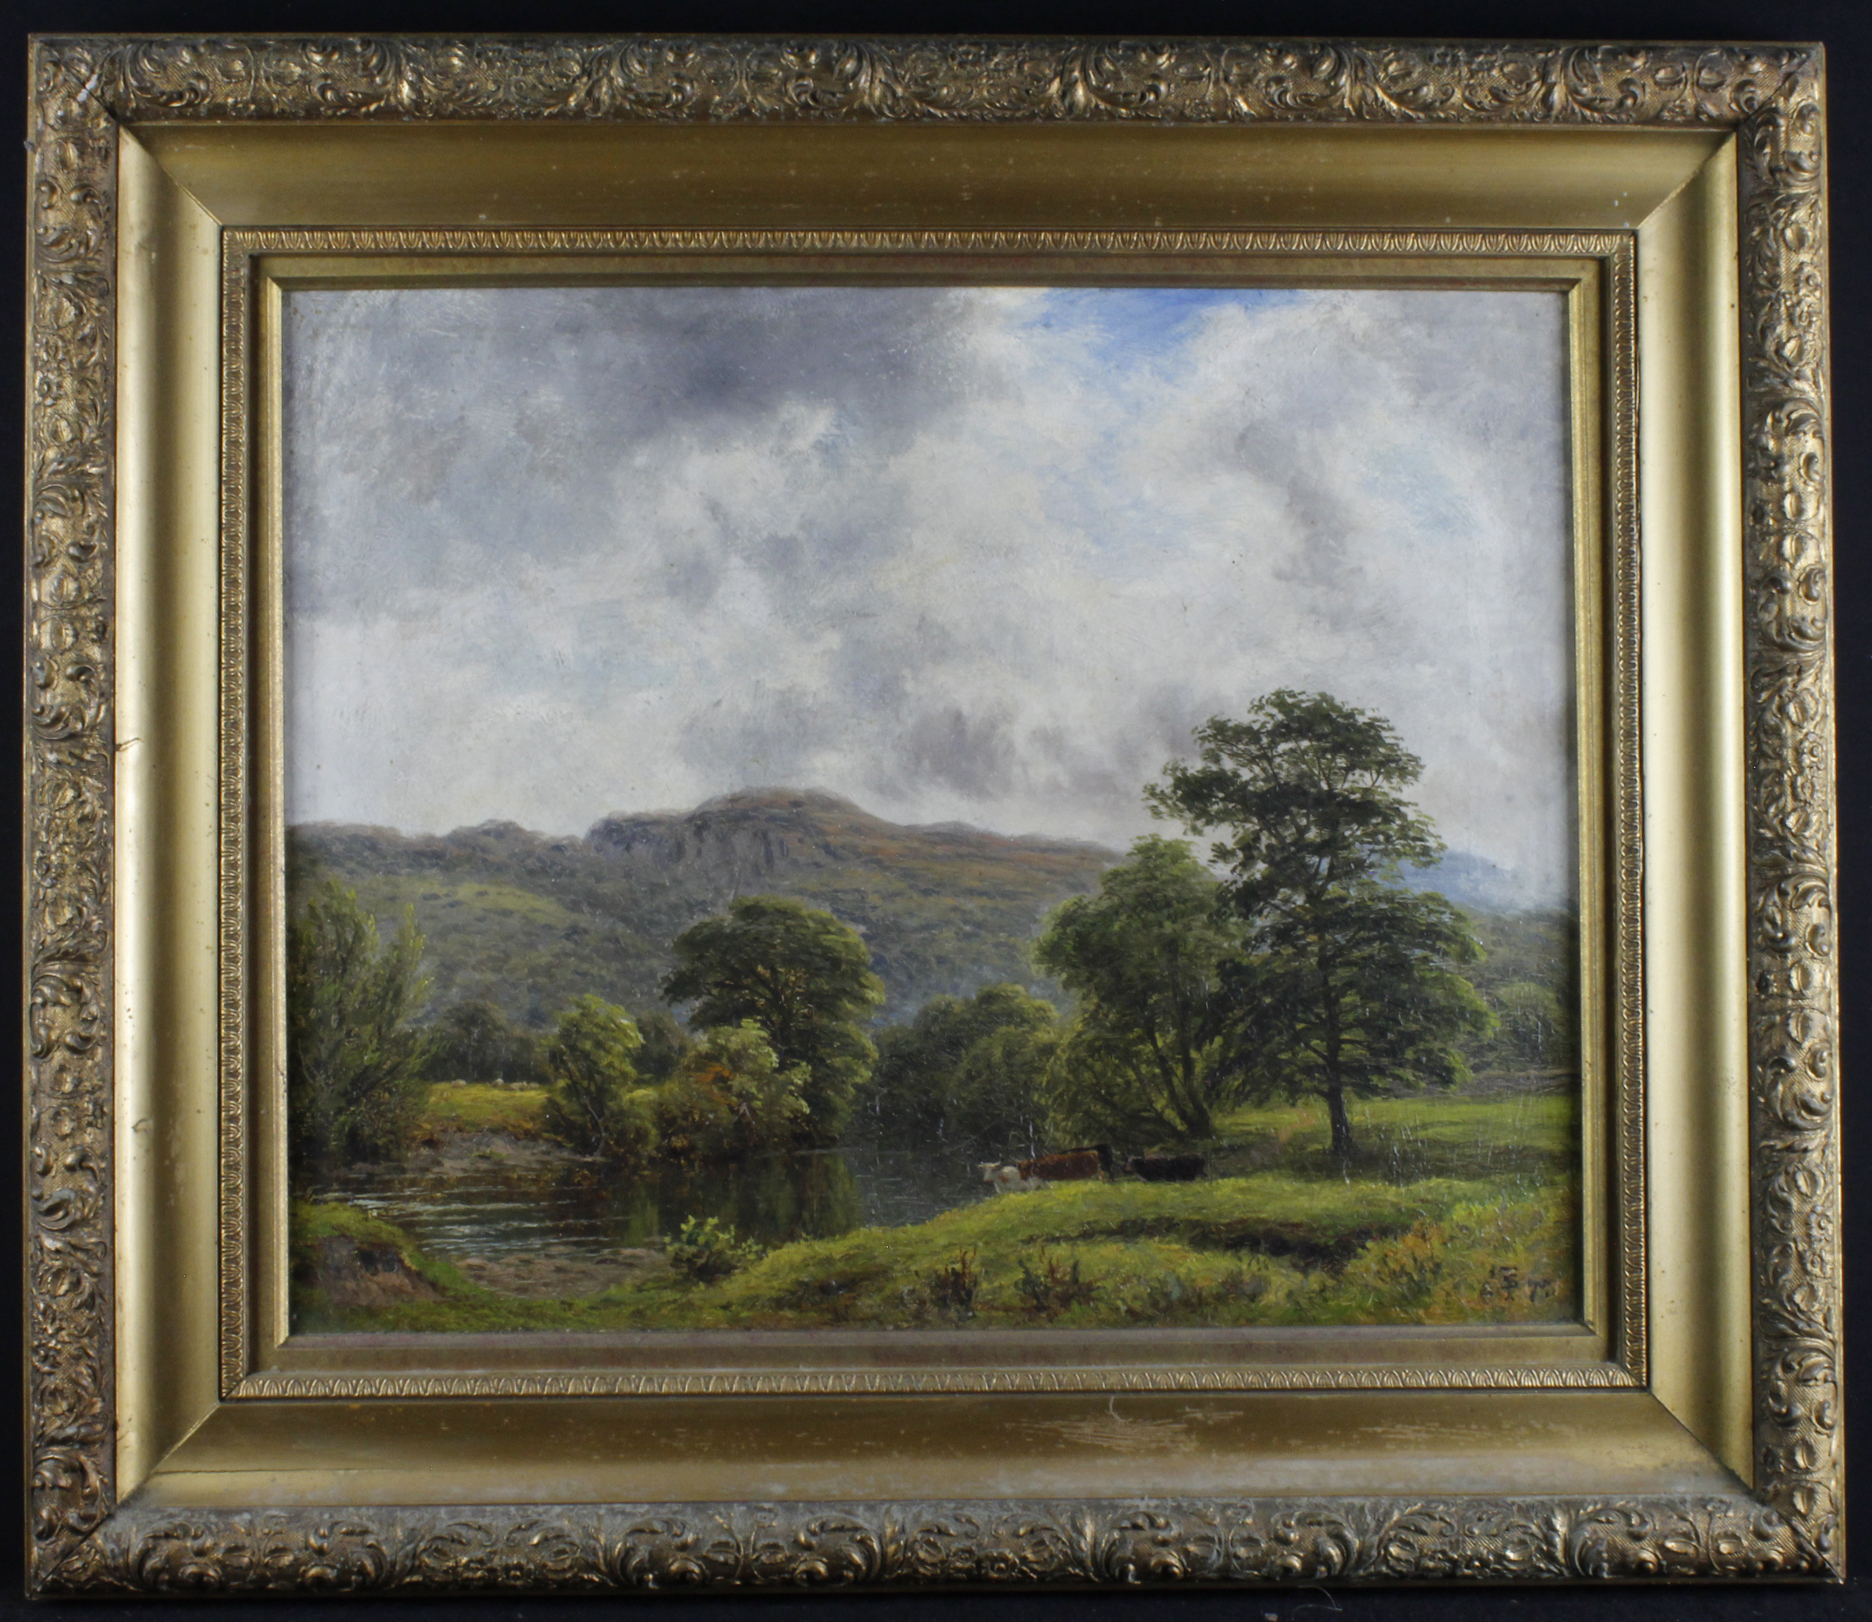 Spinks, Thomas (British) Oil on canvas. Cattle watering by a river. Signed with monogram (TS)